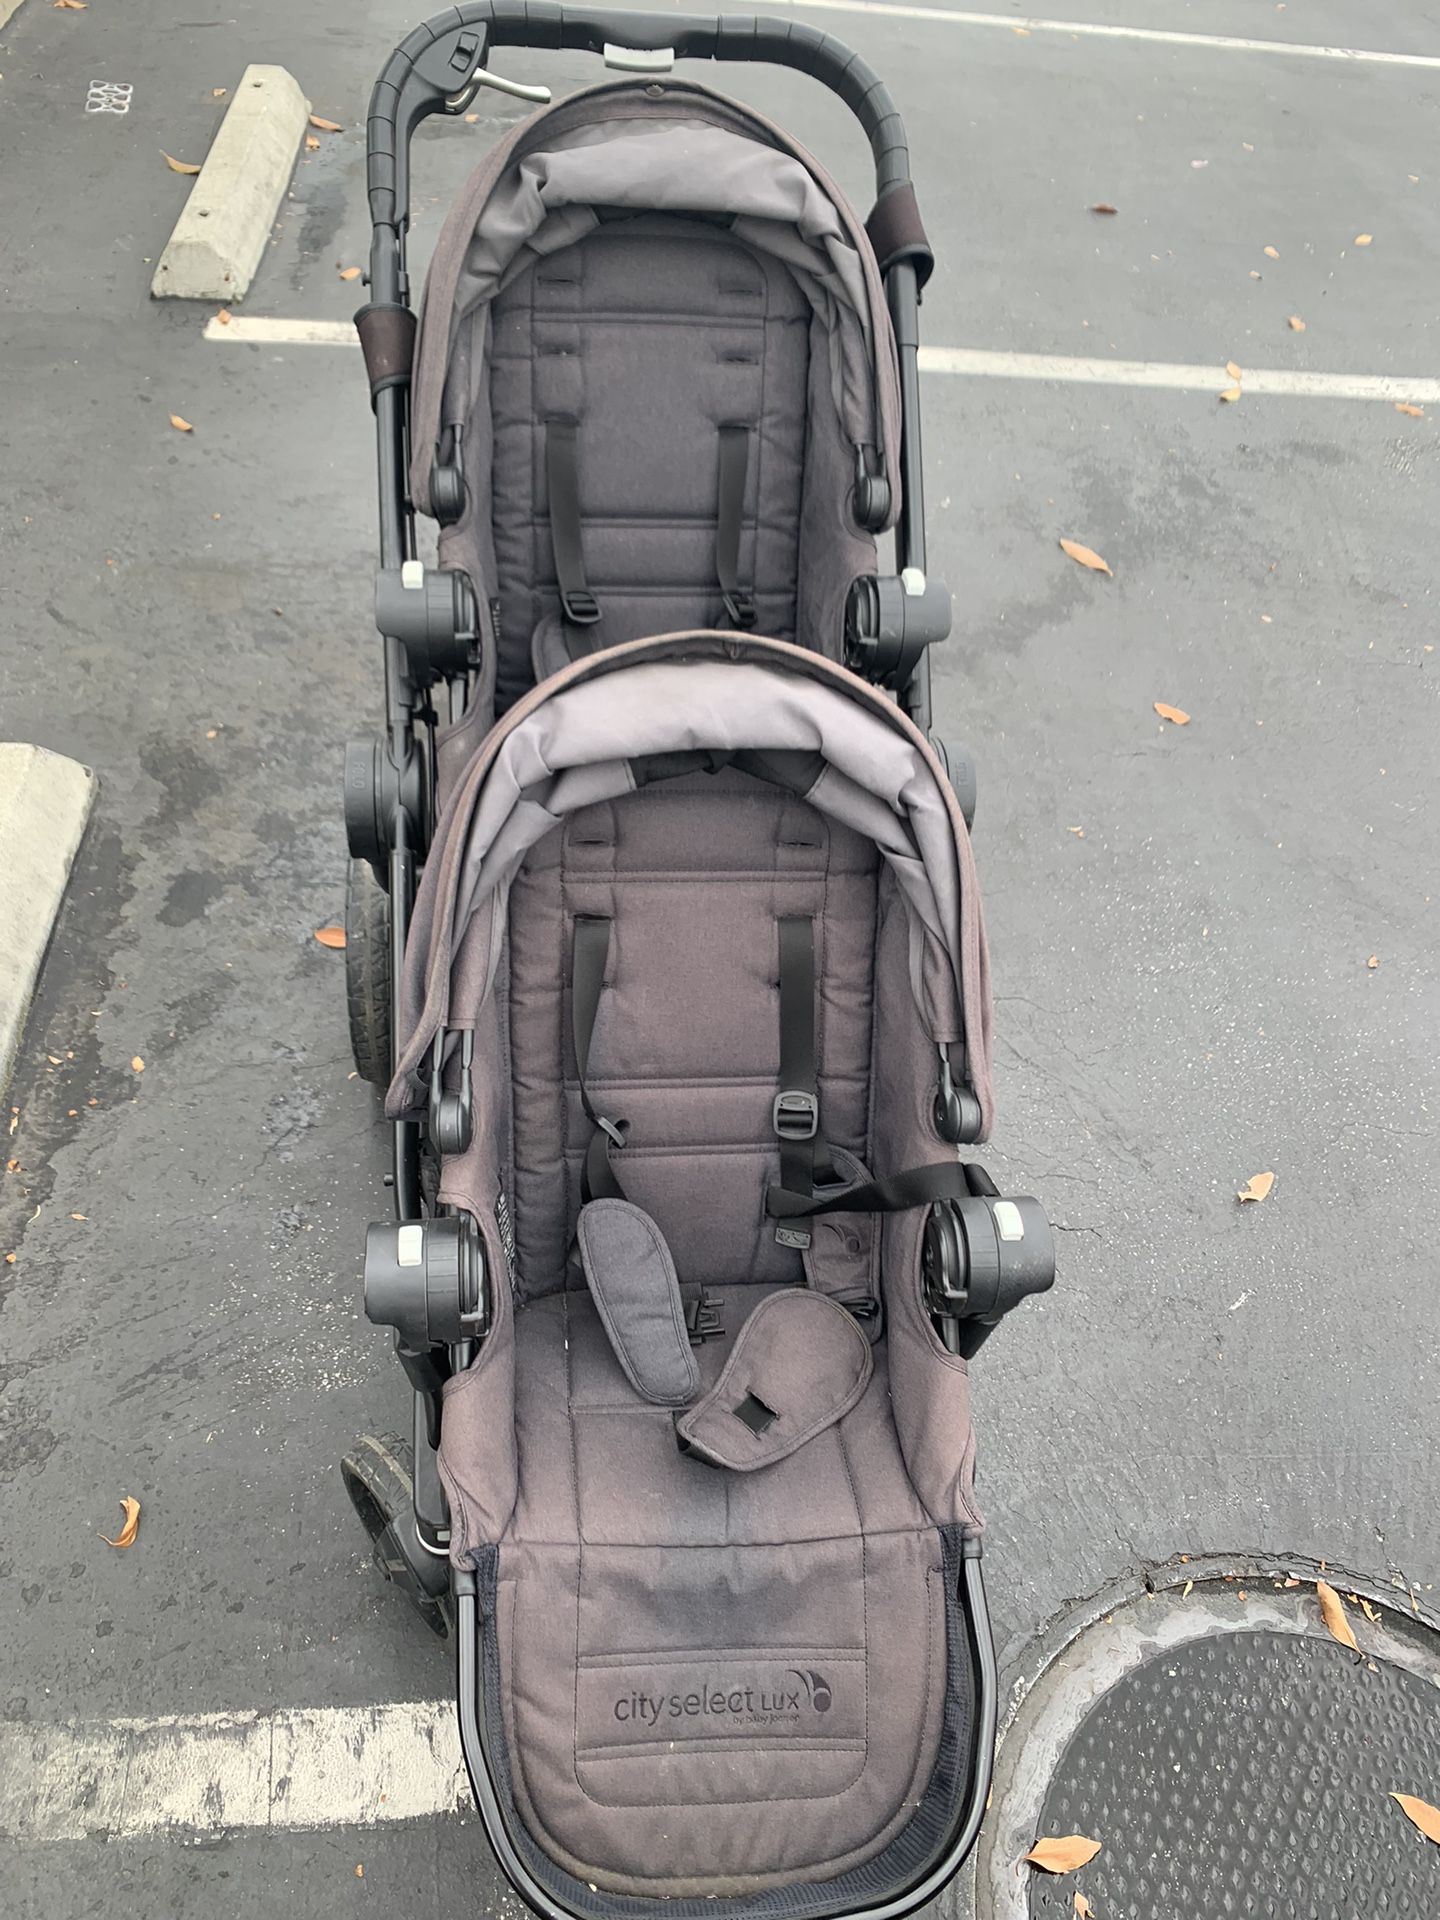 Double Stroller City Select